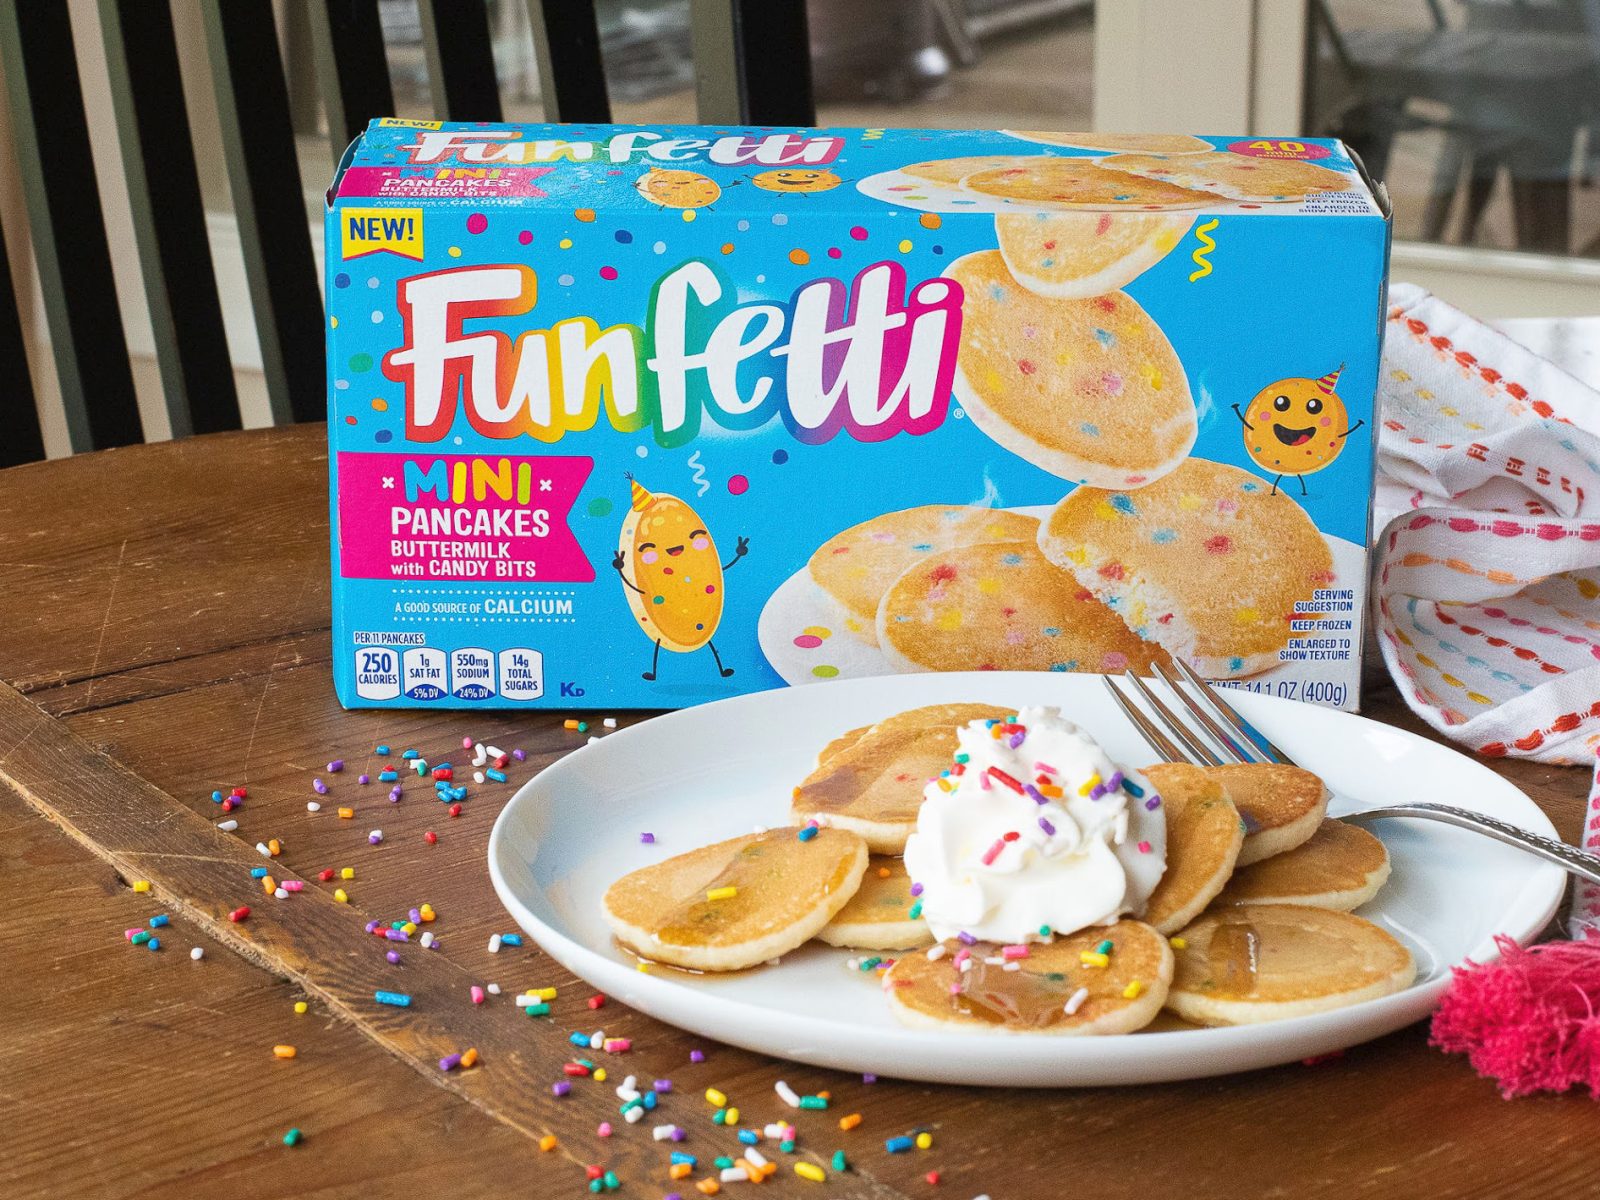 Pick Up The Big Boxes Of Funfetti Frozen Mini Pancakes For Just $3.99 Per Box At Kroger